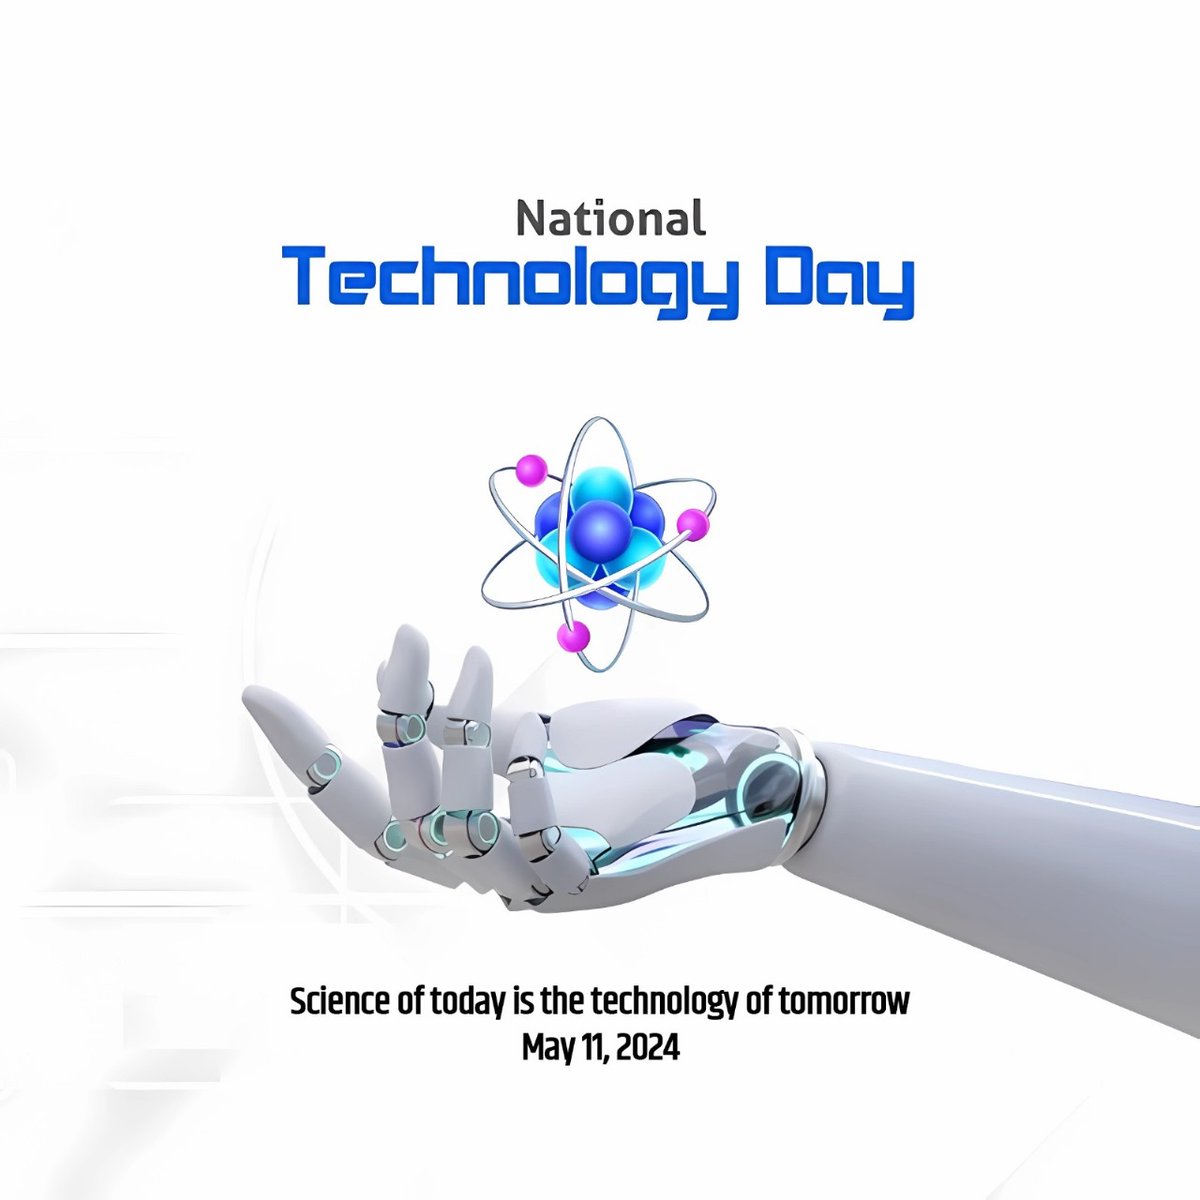 Technology turns a big idea into innovation, connects the world and leads it towards progress. #NationalTechnologyDay